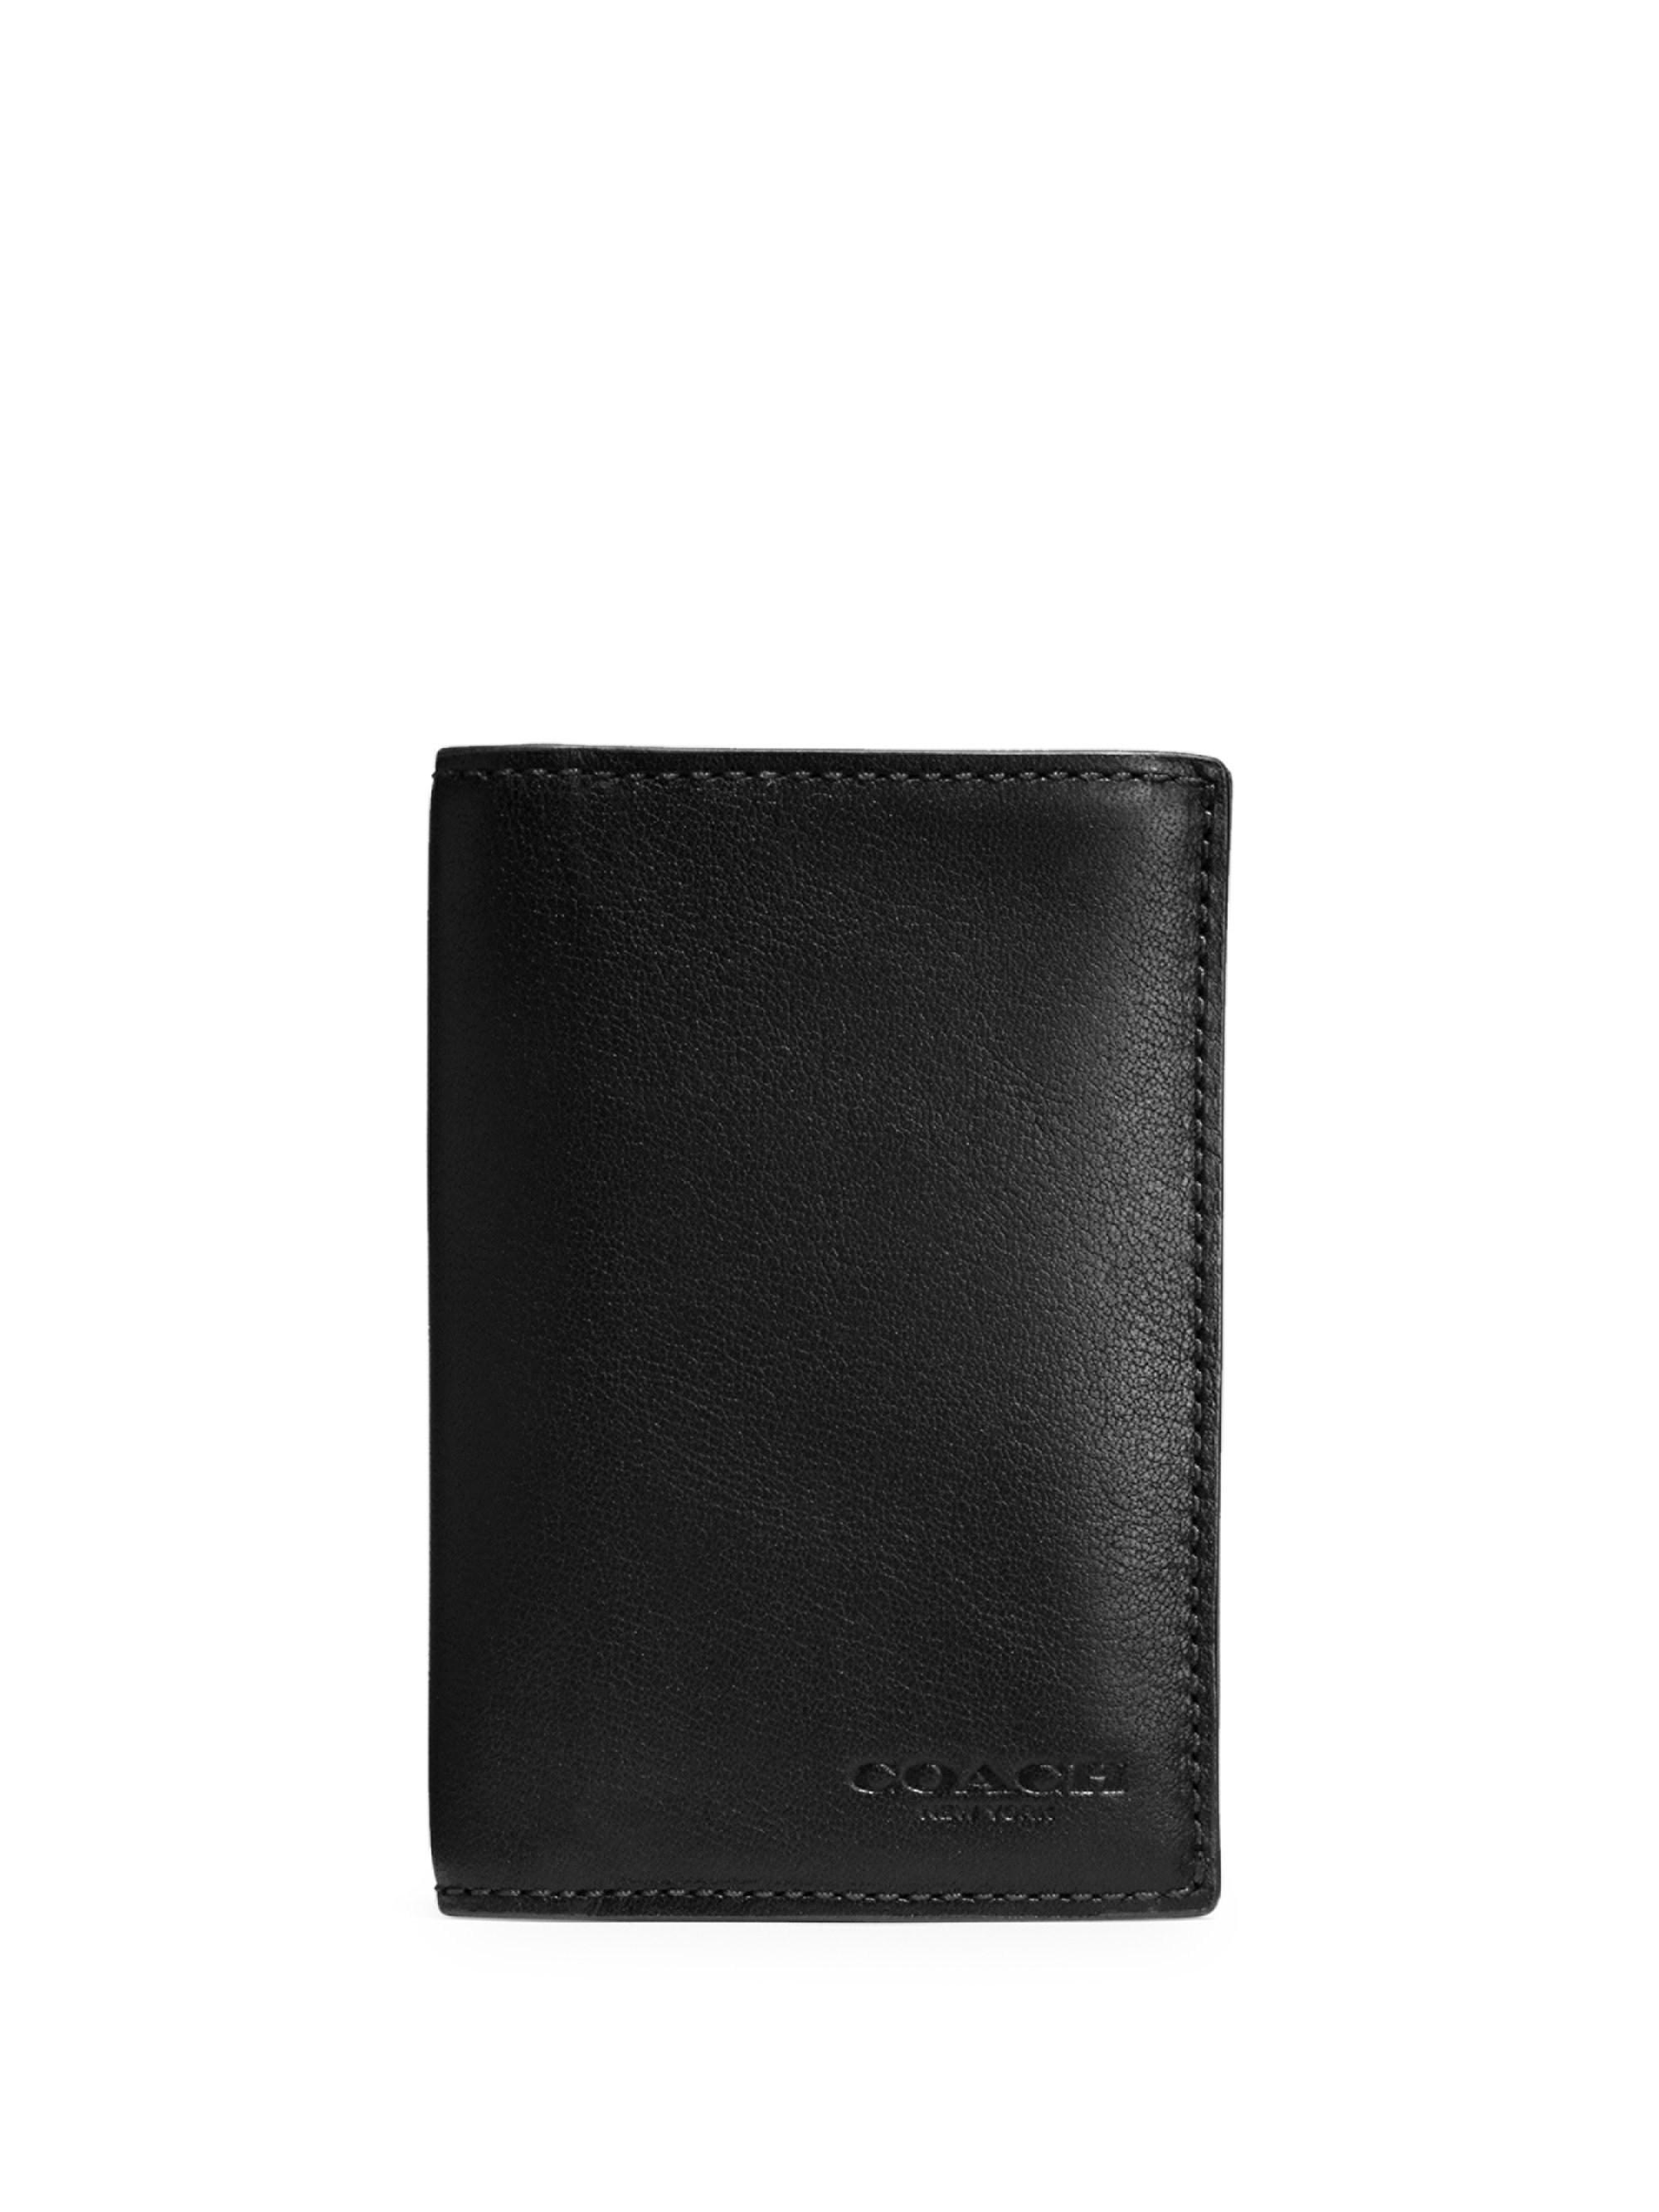 COACH Leather Vertical Bifold Card Case in Black for Men - Lyst